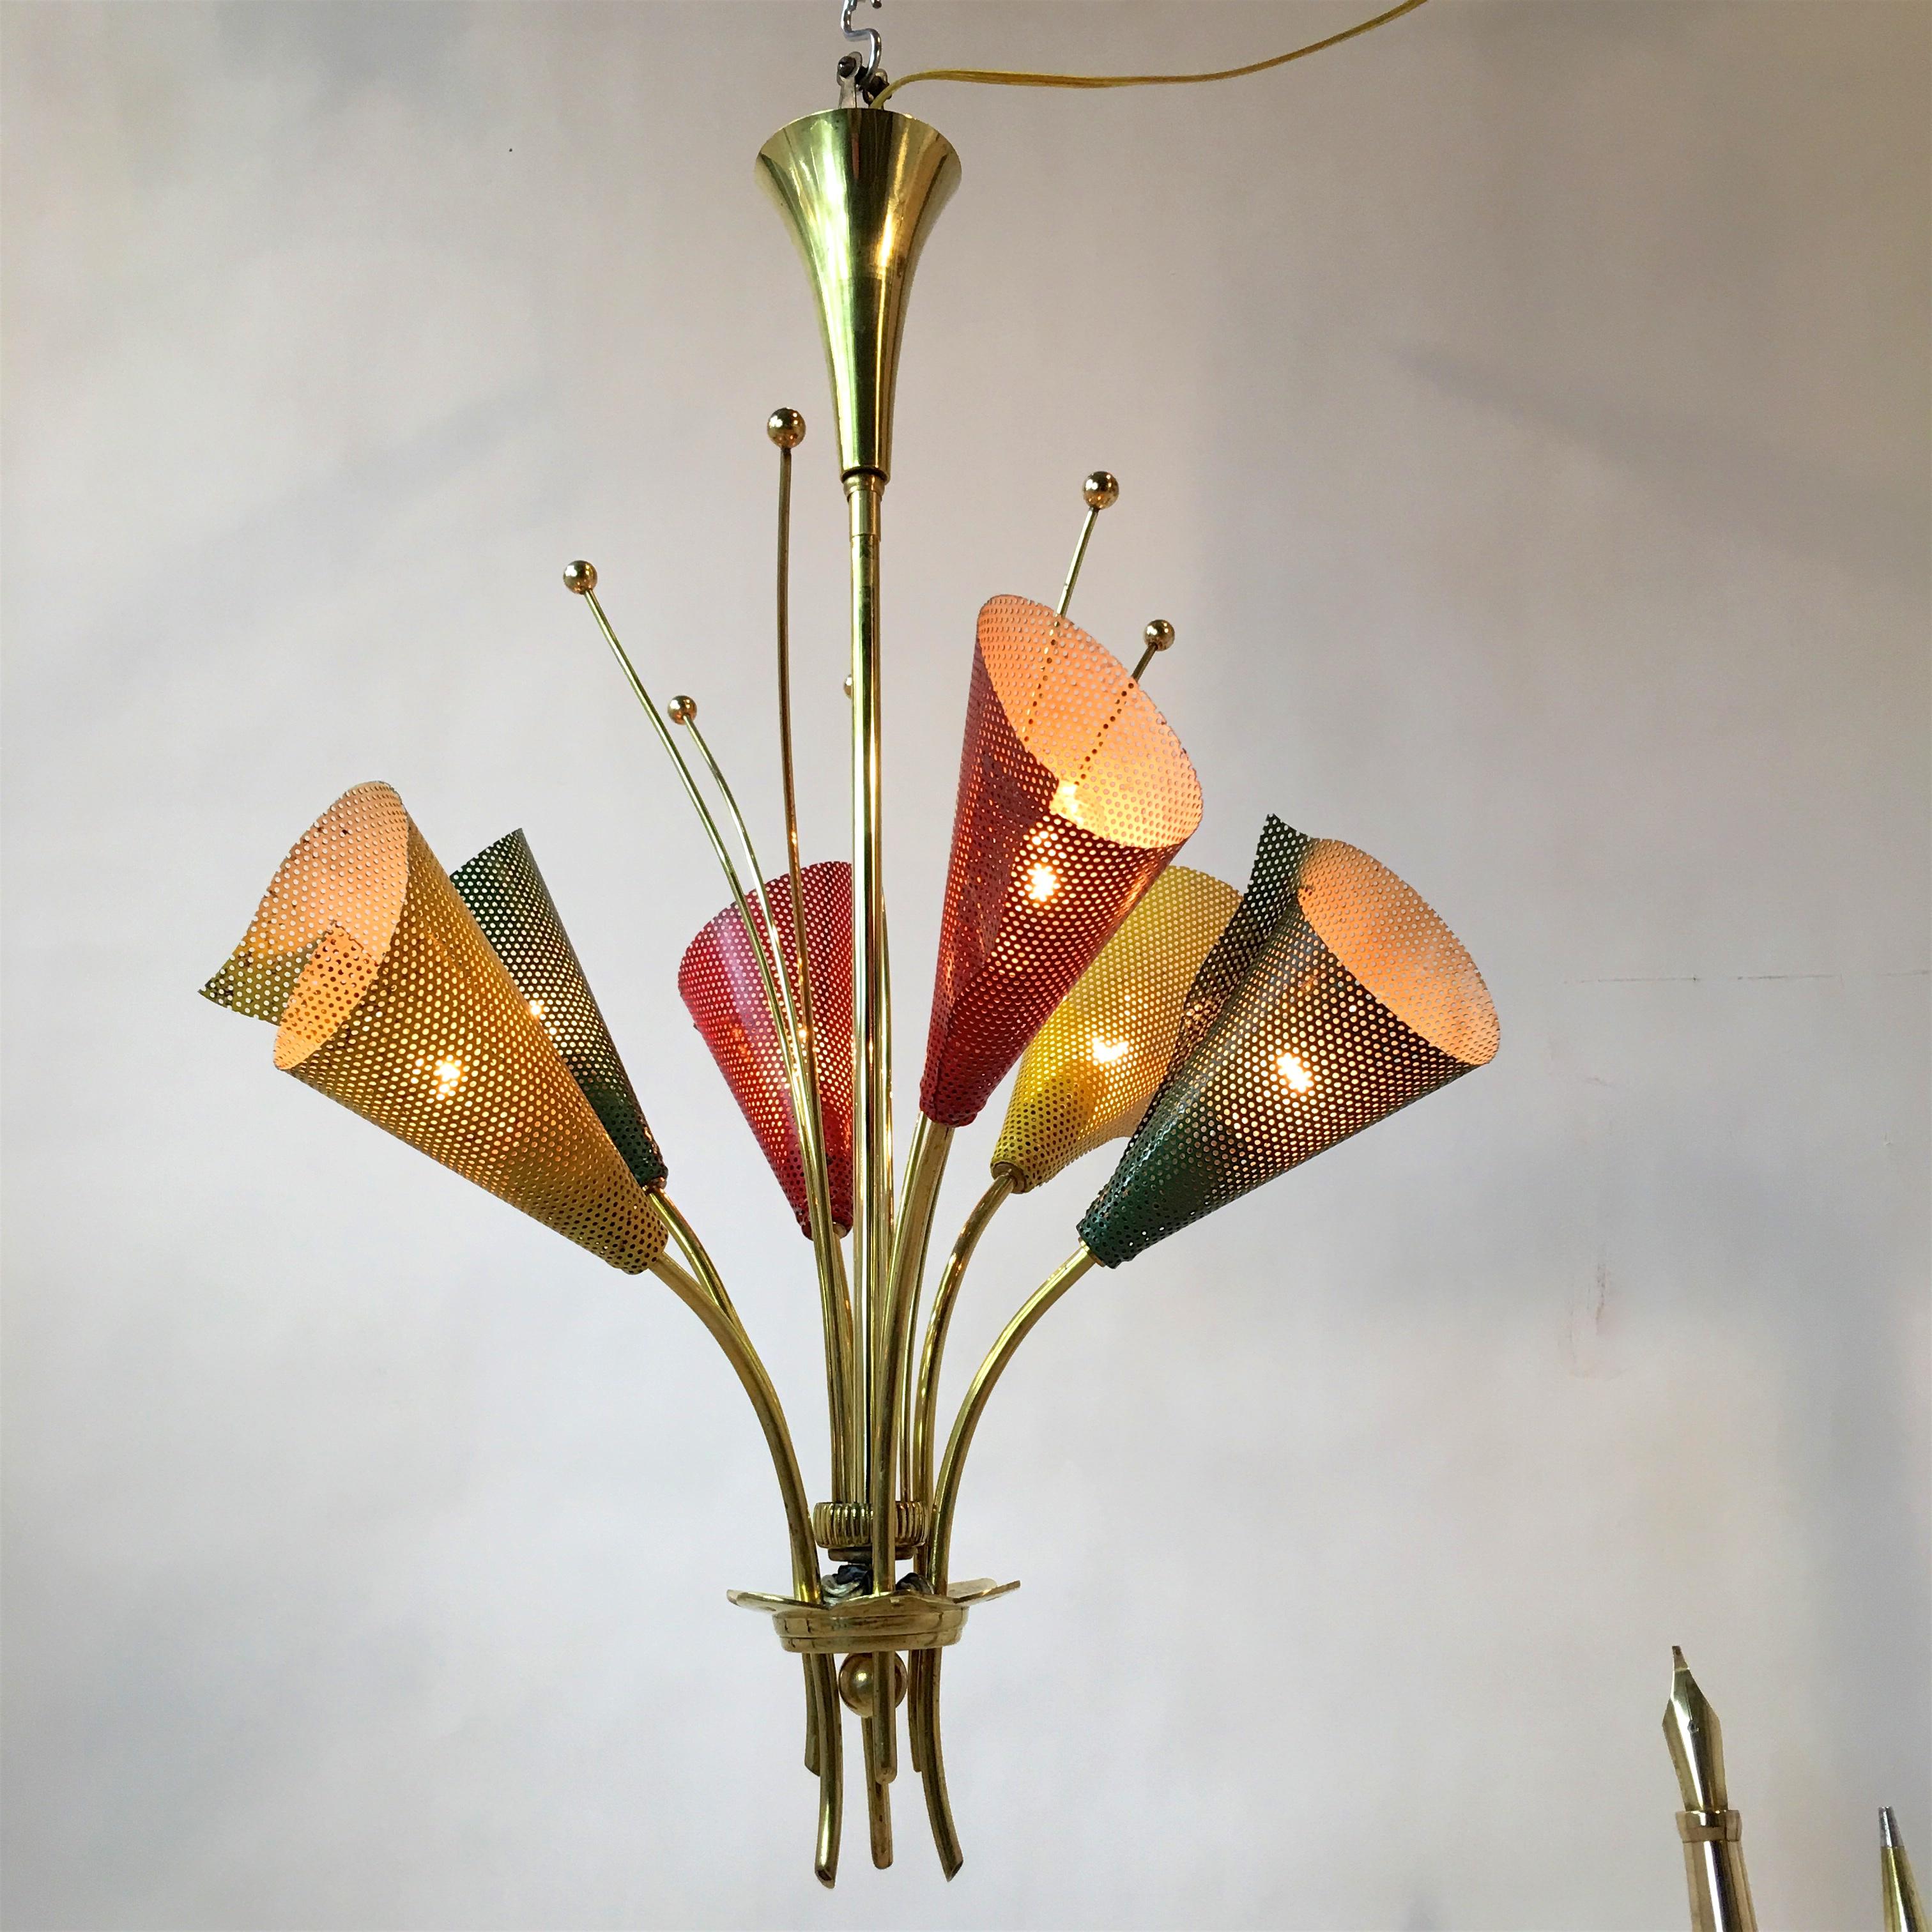 1950s French chandelier by Kobis et Lorence in the form of a bouquet of flowers with six curved brass arms and color green, yellow and red enameled perforated metal cones and original brass trumpet canopy.

Chandelier has been rewired and tested.